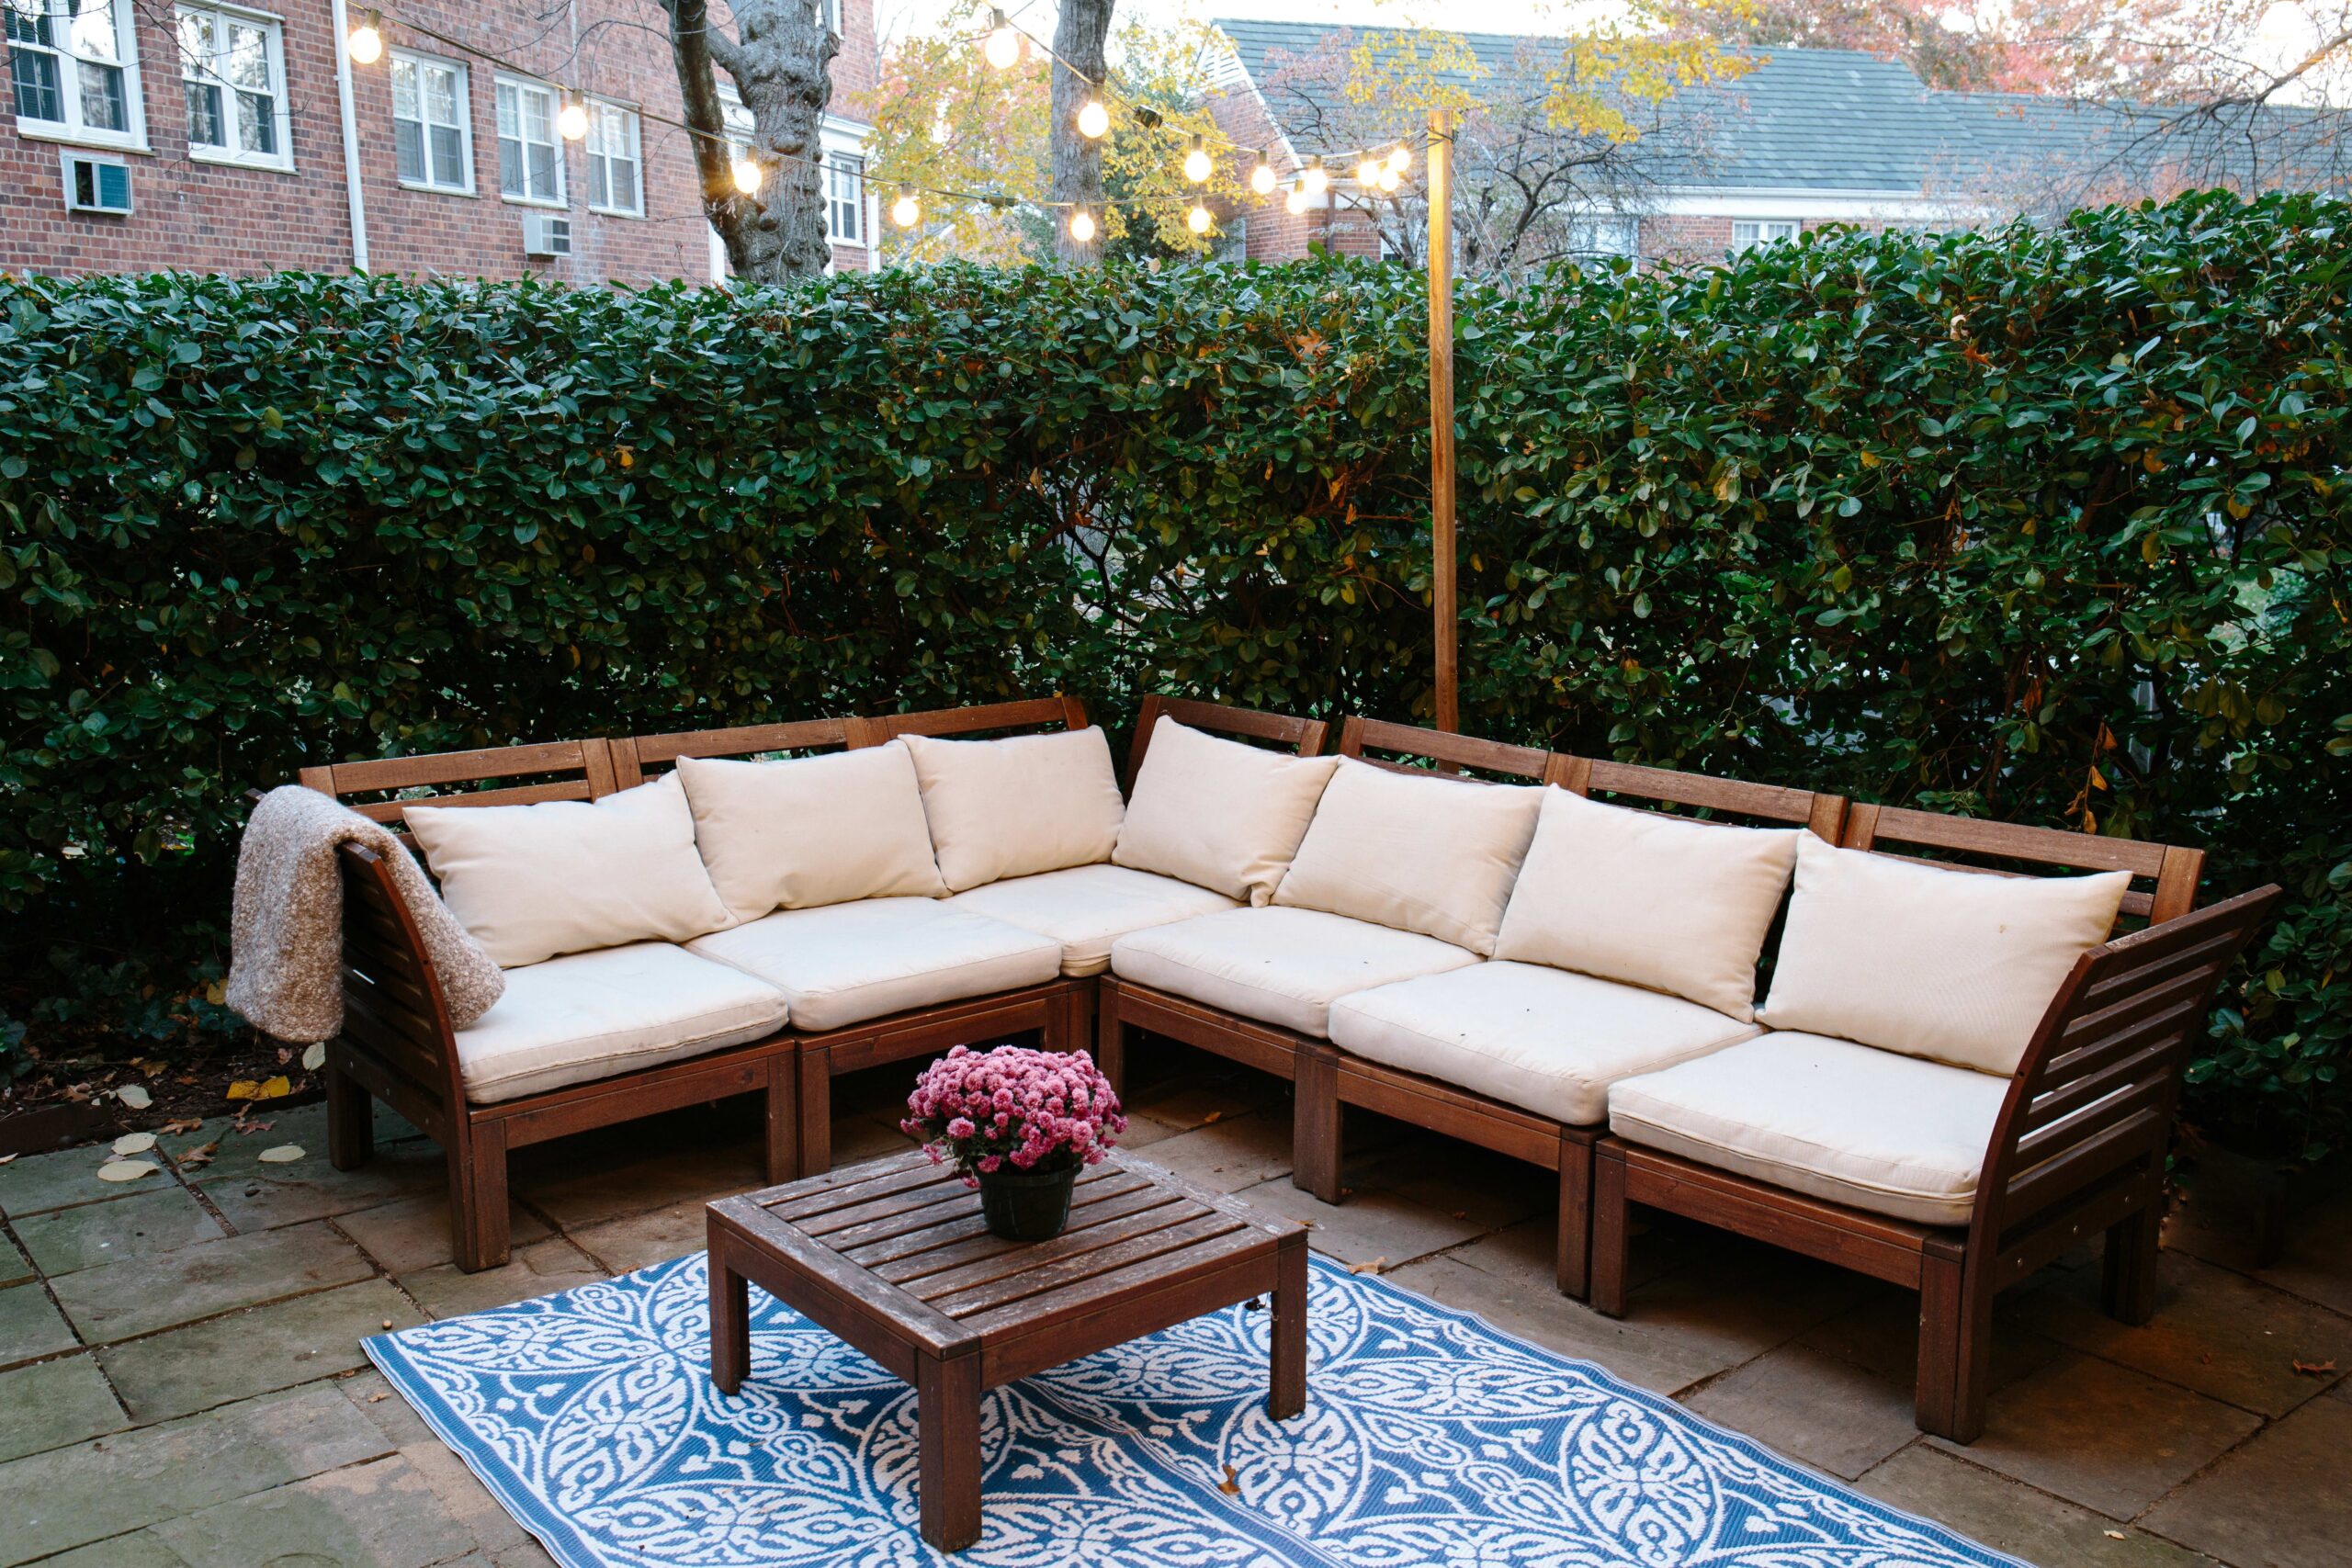 Tips for choosing furniture from a patio
  furniture clearance sale